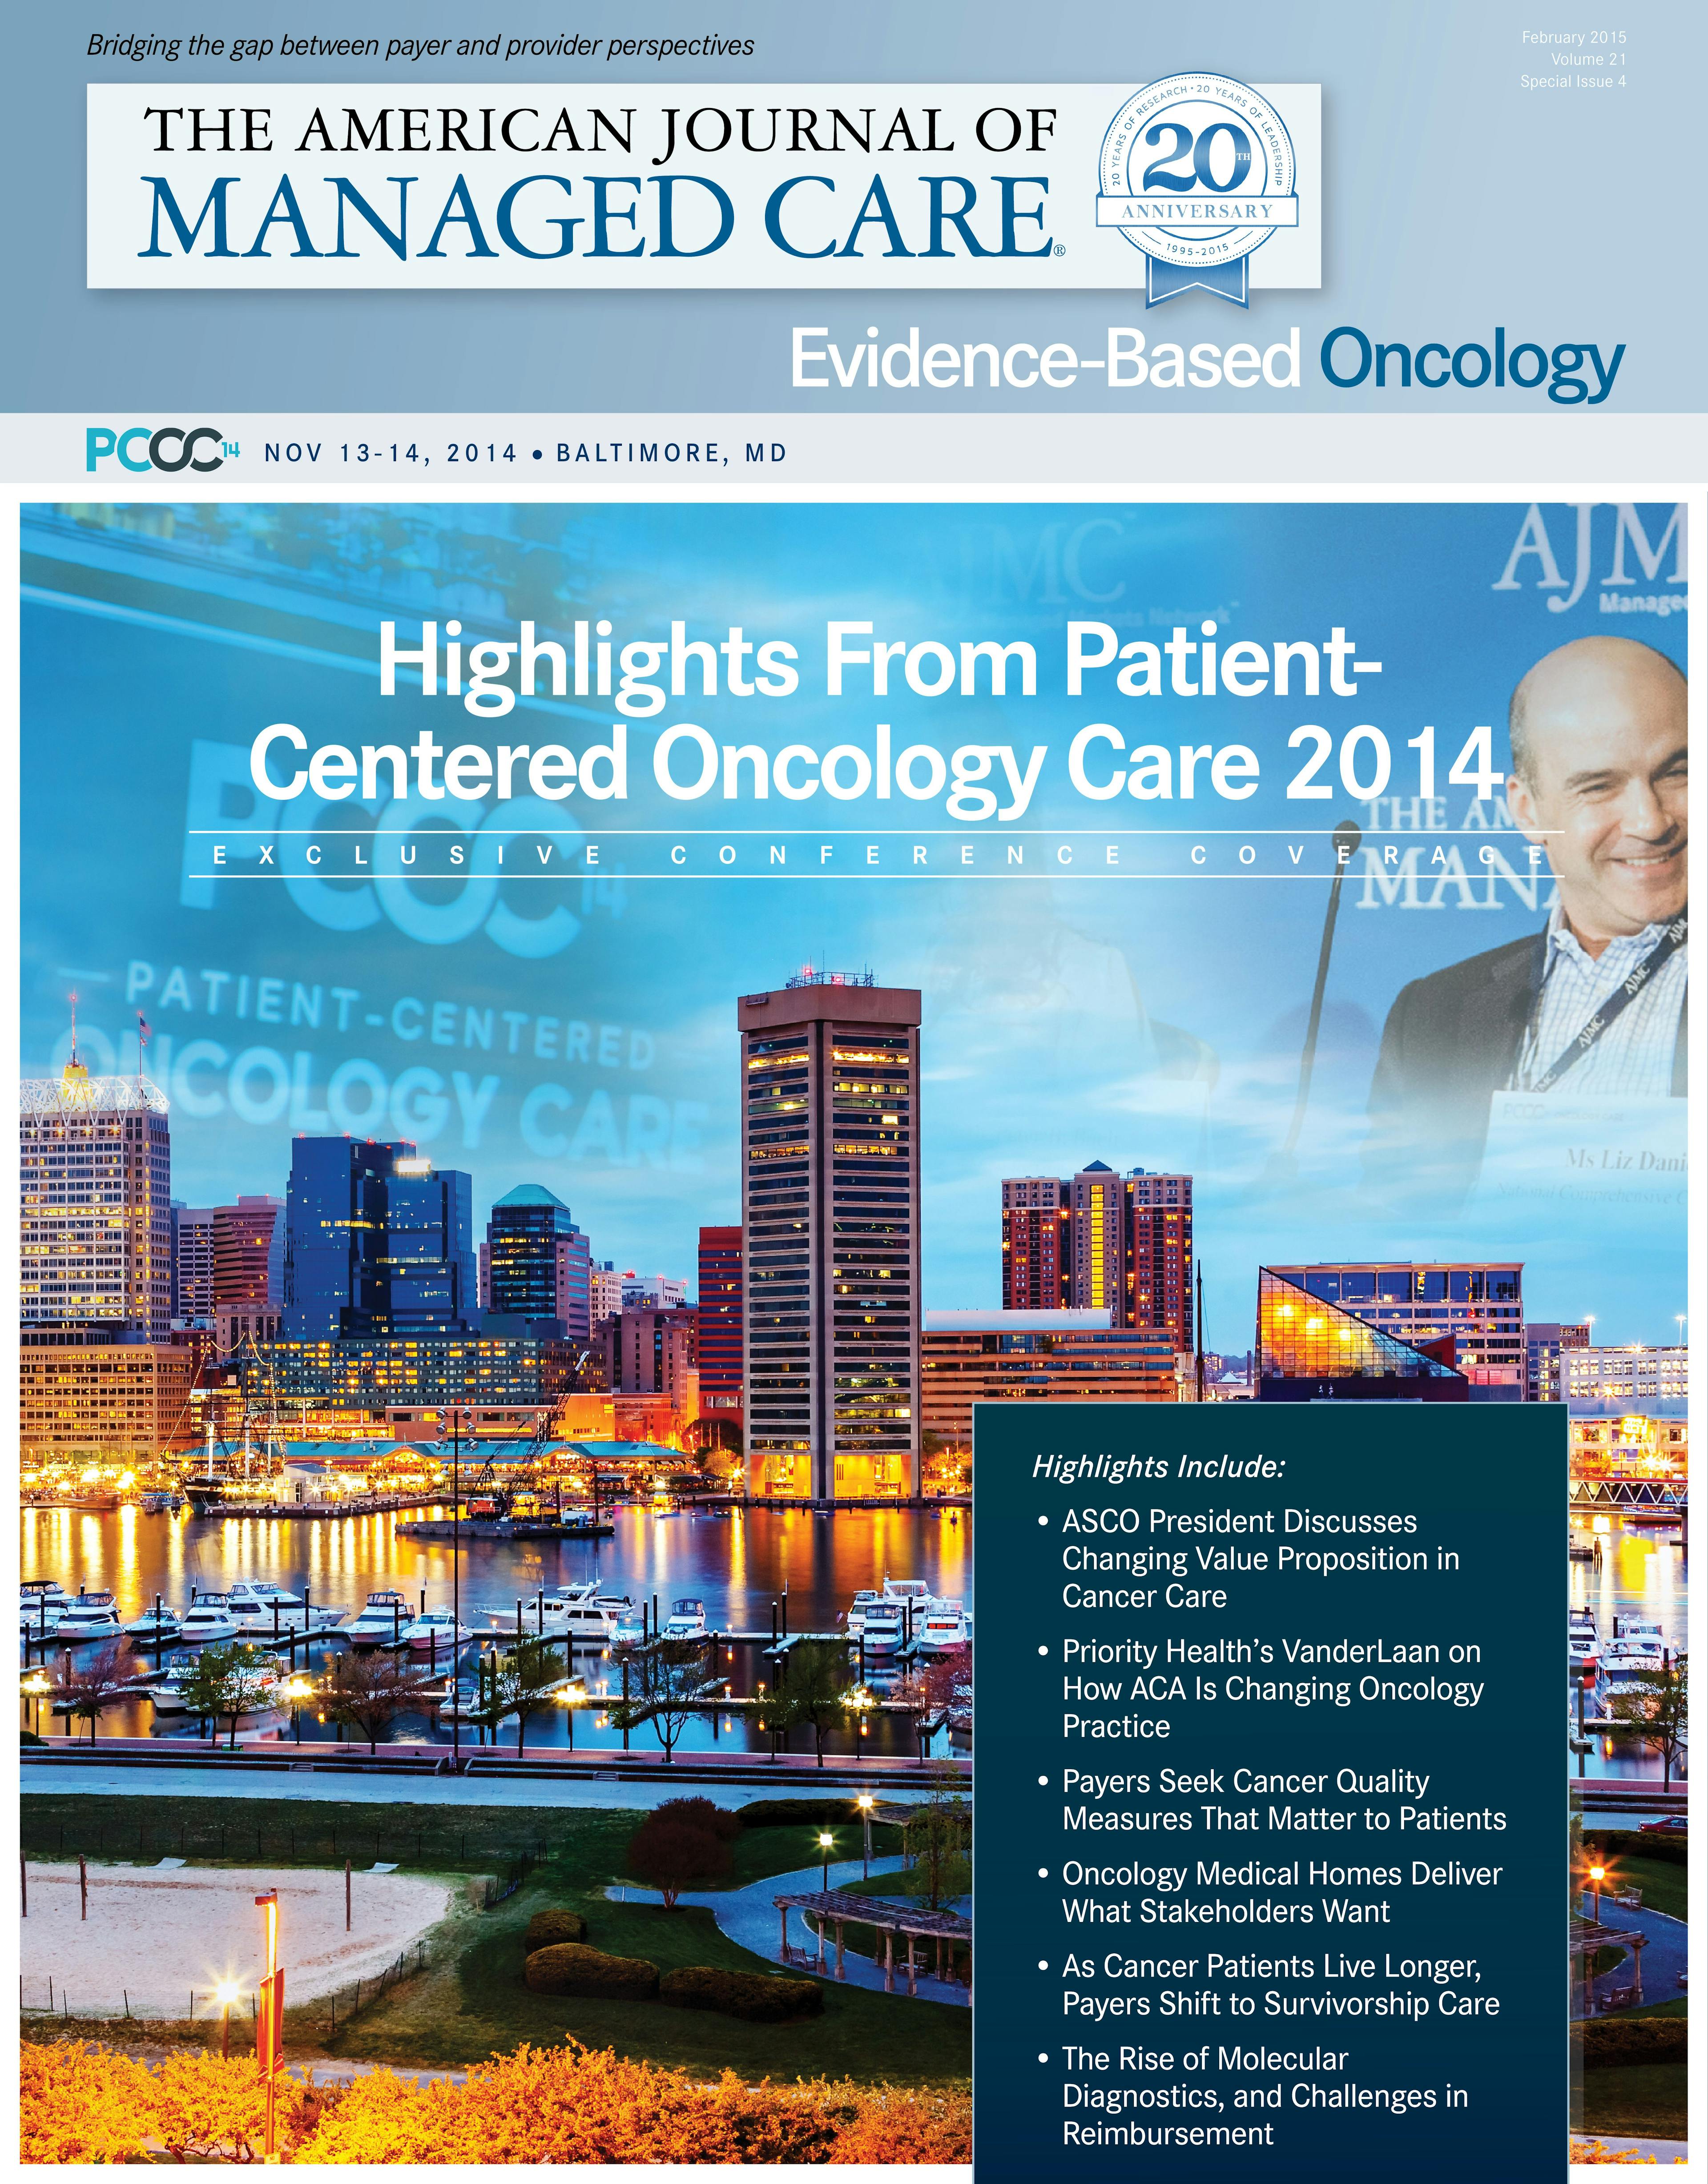 Patient-Centered Oncology Care